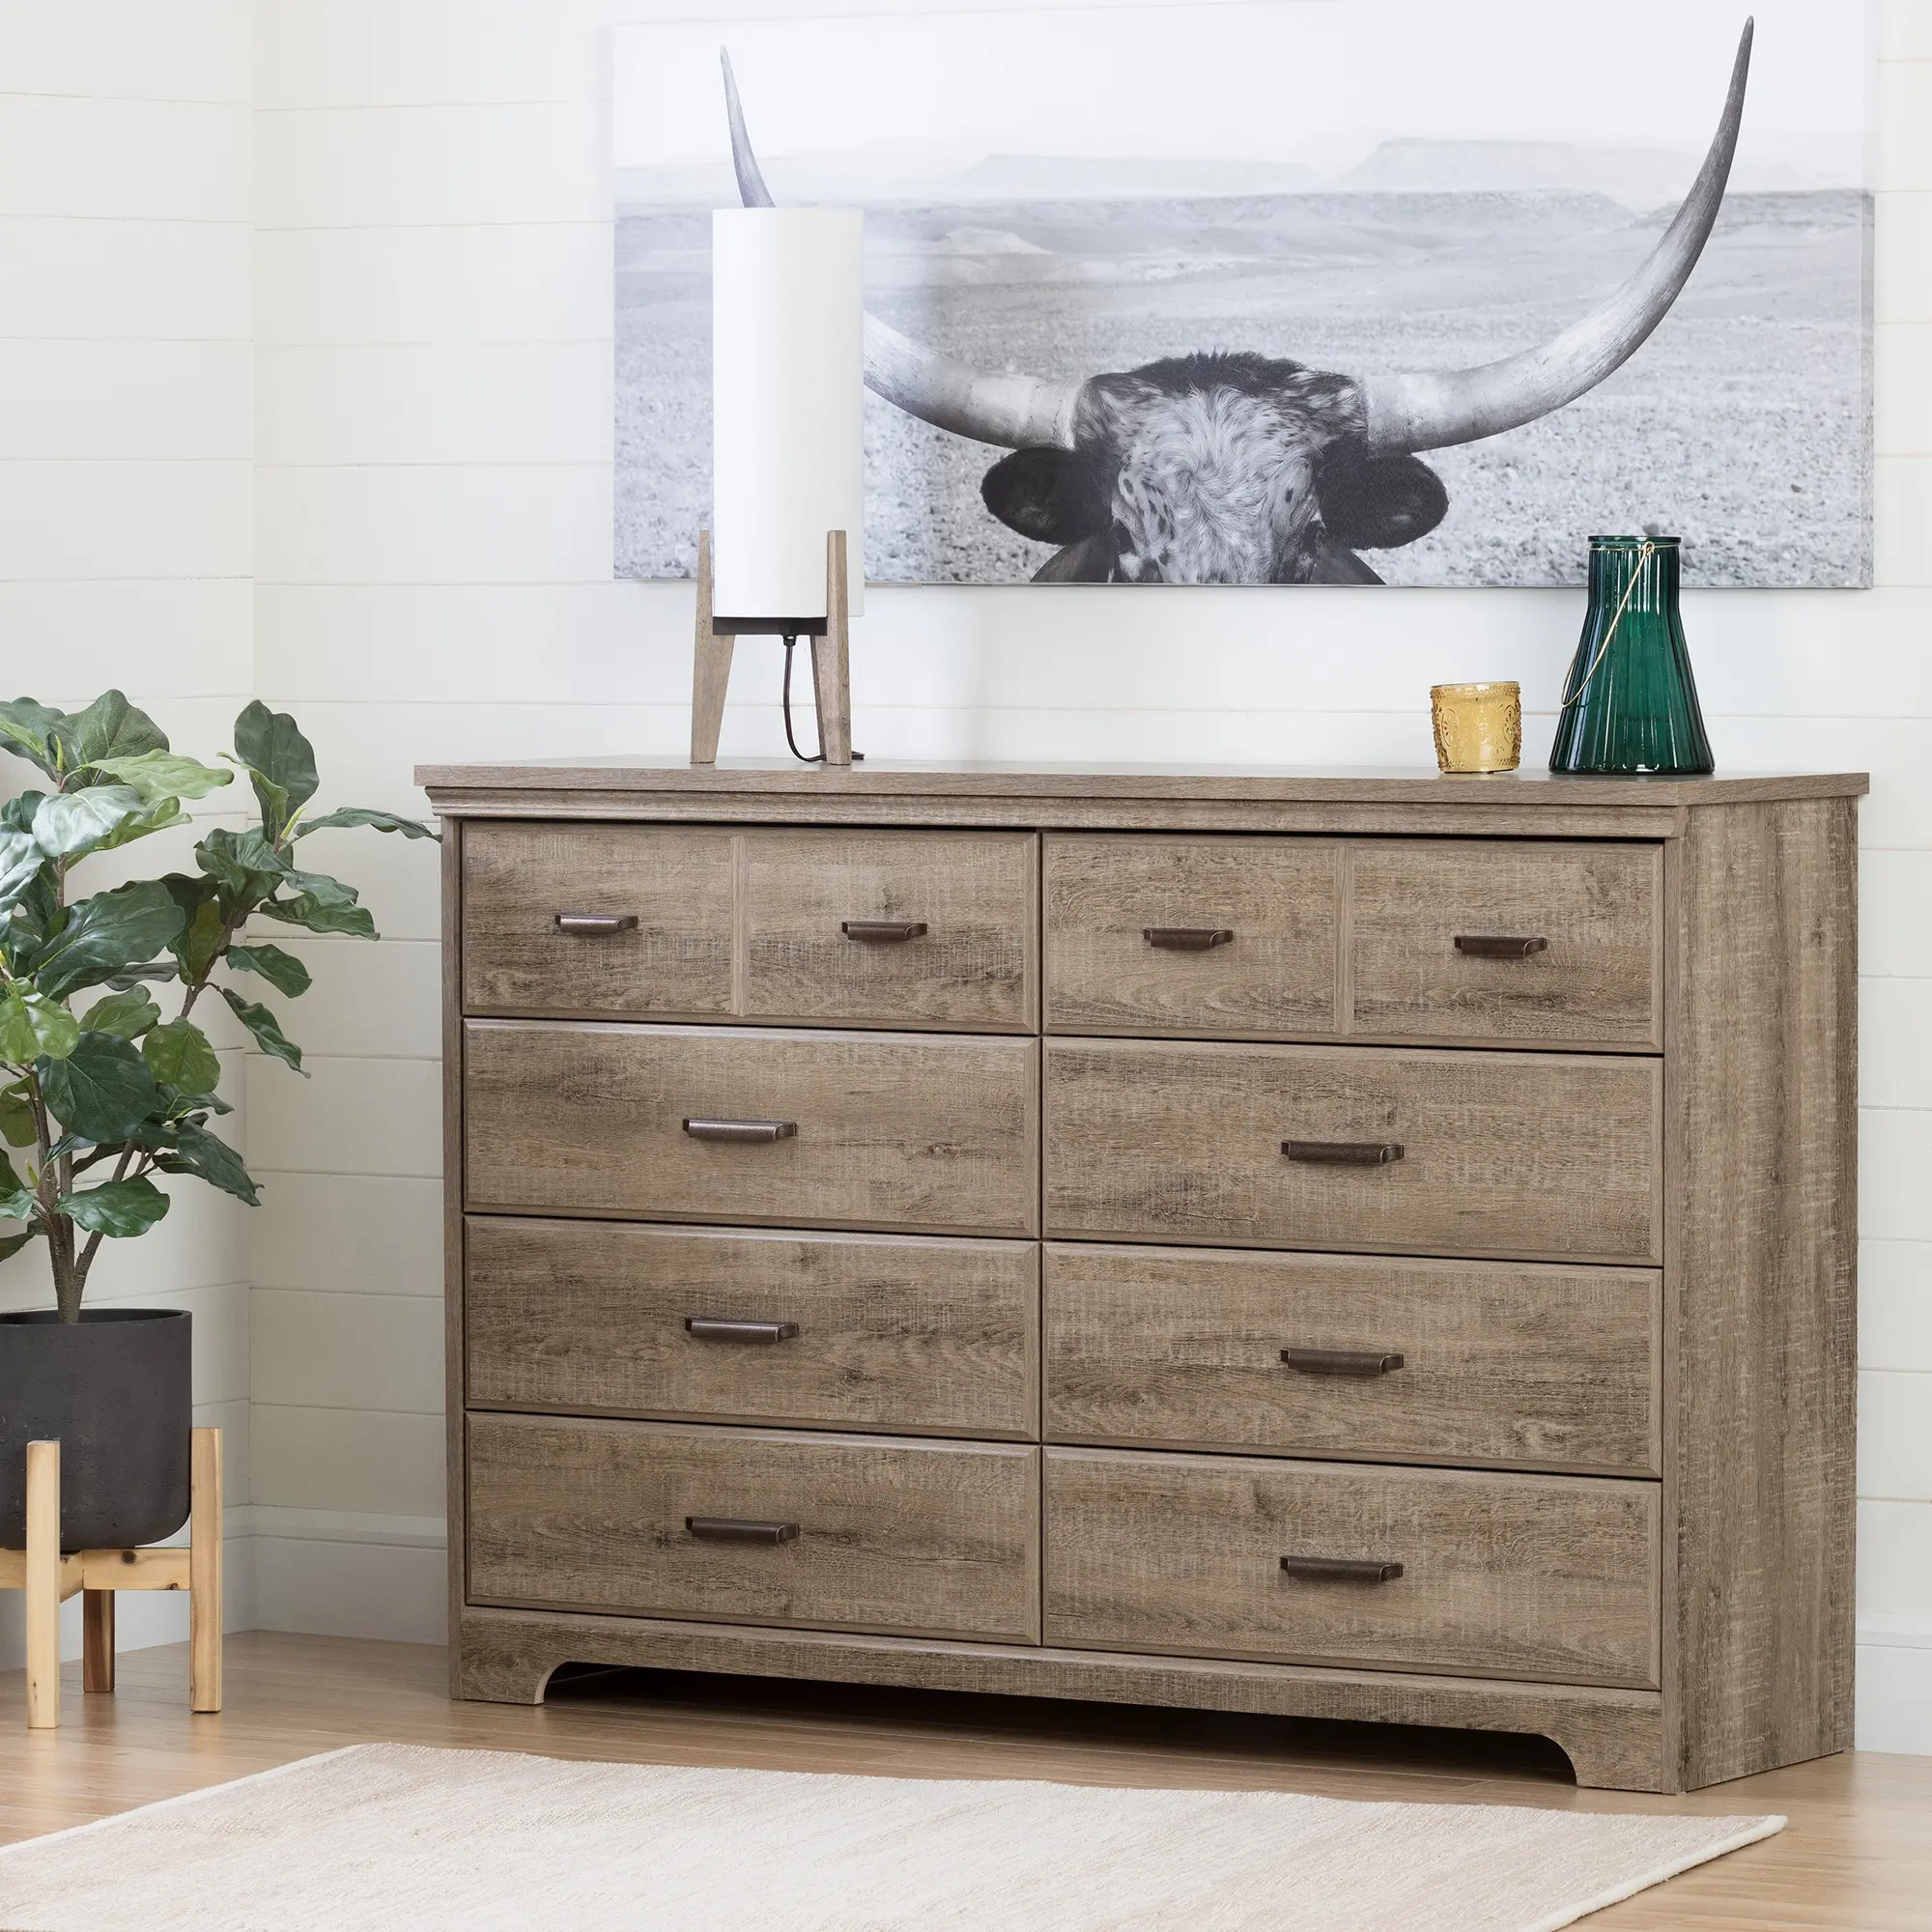 Photos - Dresser / Chests of Drawers South Shore Versa Weathered Oak 8-Drawer Double Dresser - South Shore 1060